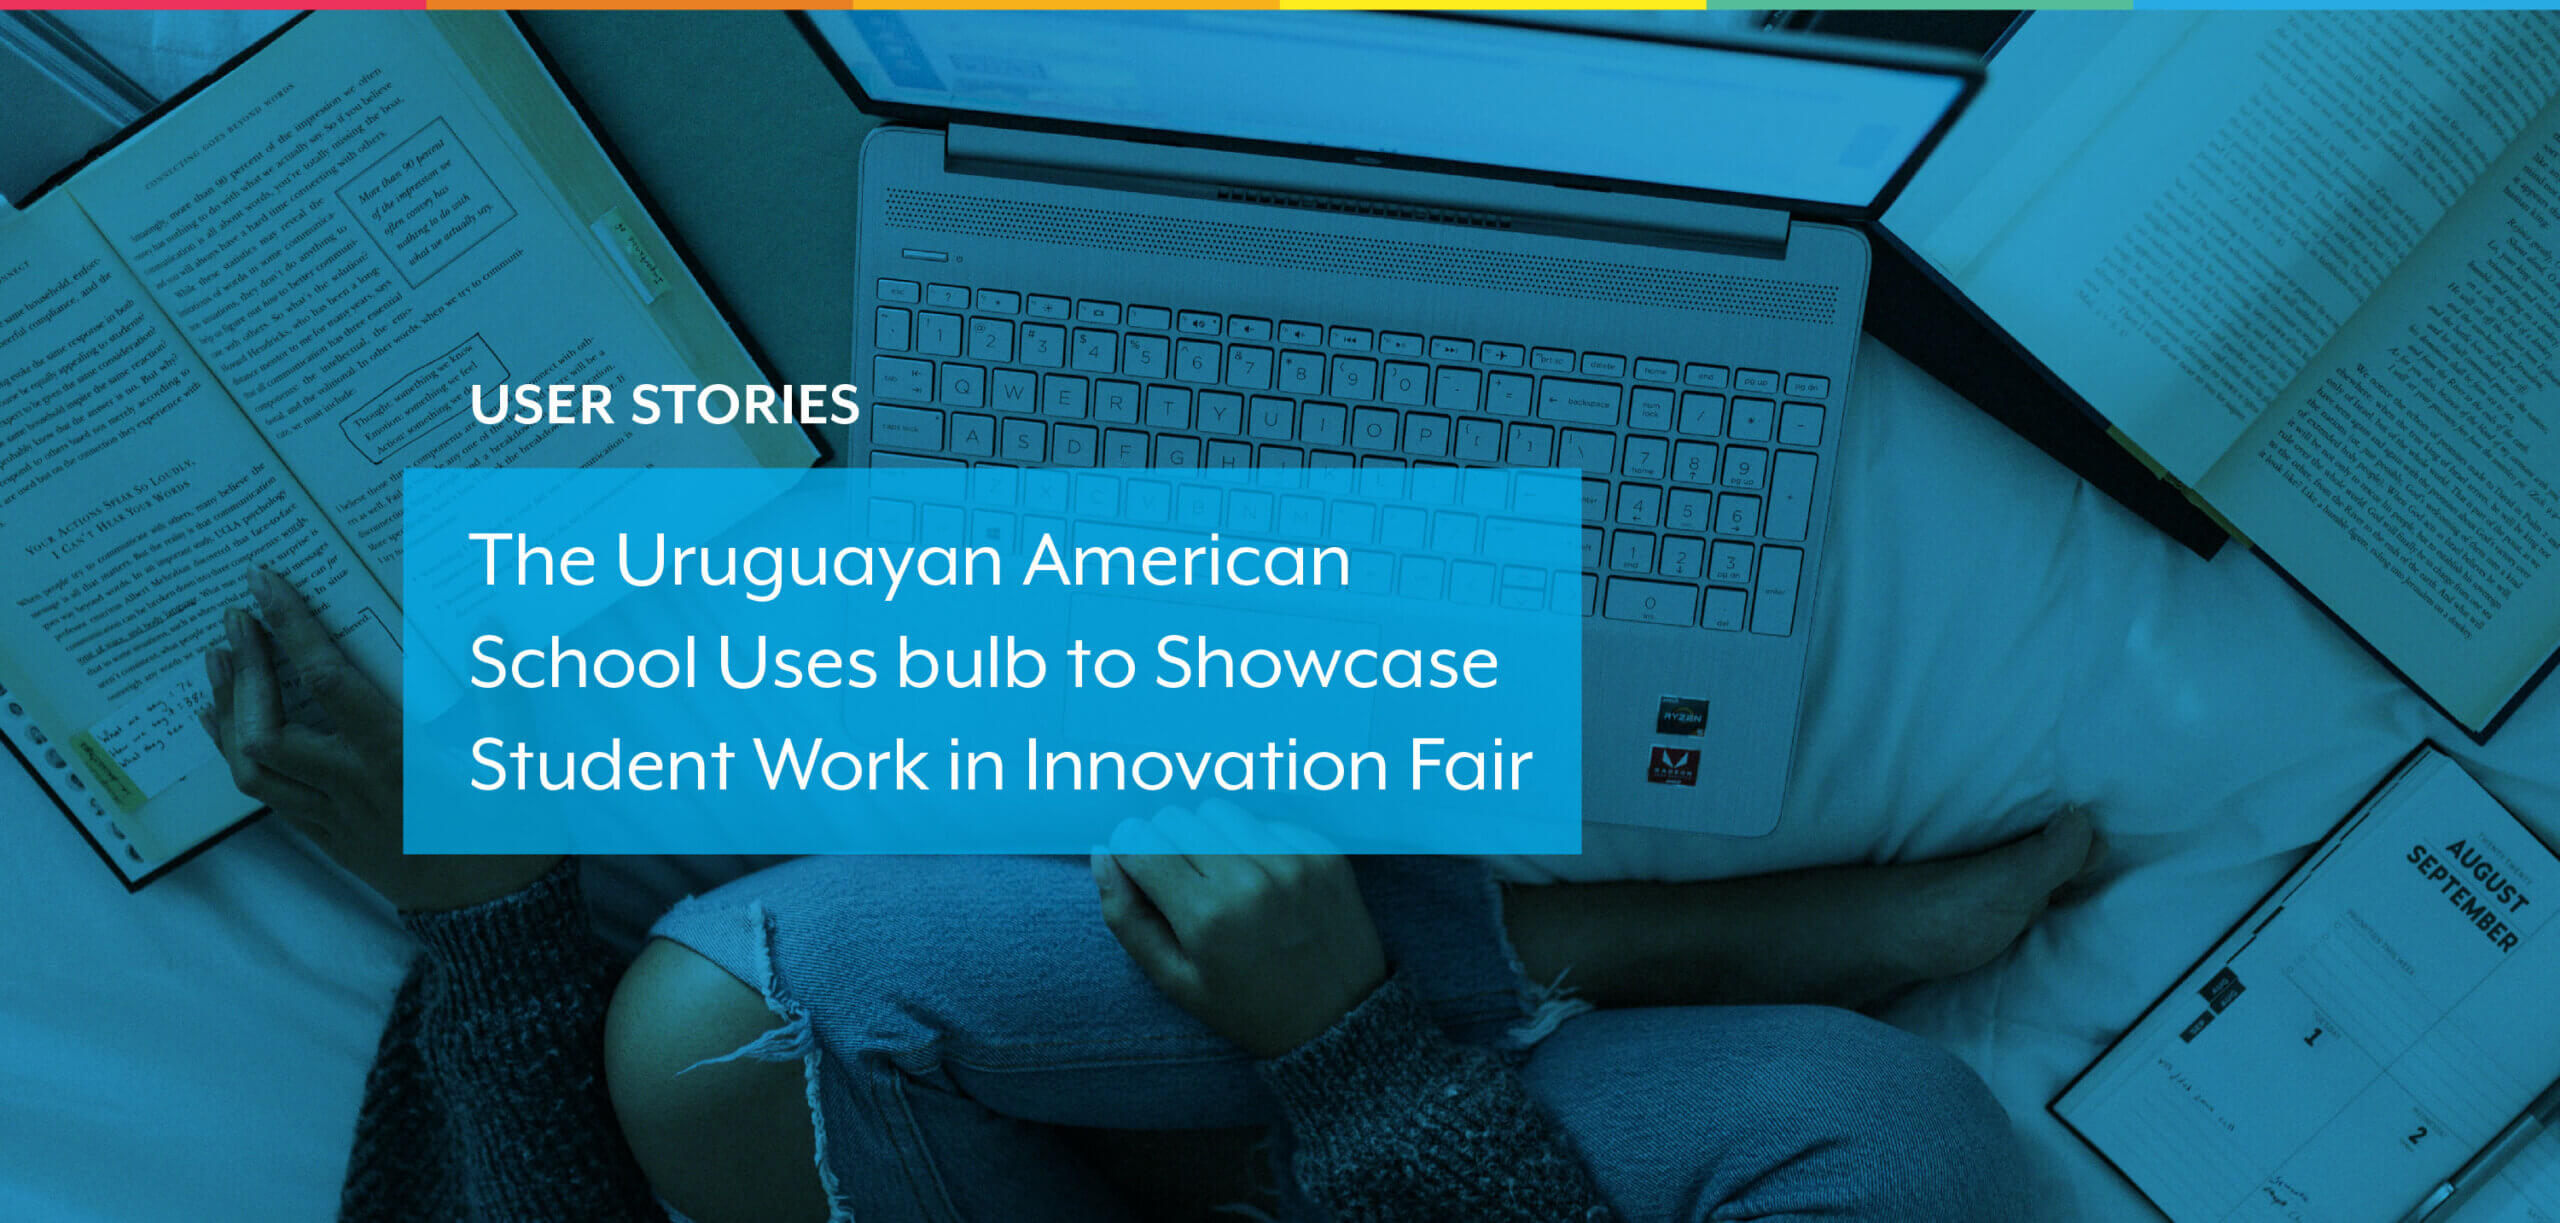 The Uruguayan American School Uses bulb to Showcase Student Work in Innovation Fair